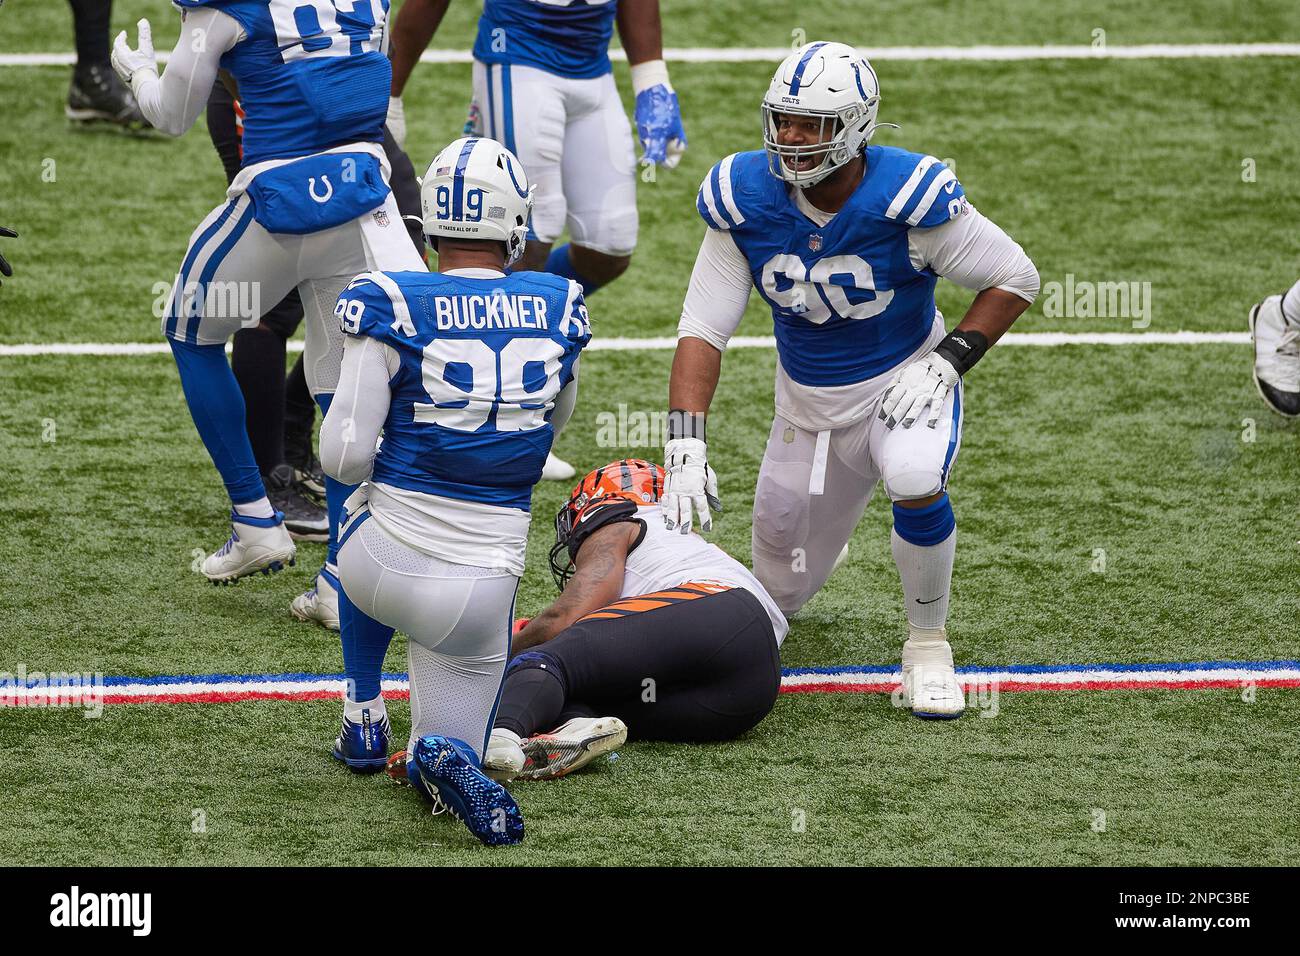 INDIANAPOLIS, IN - OCTOBER 18: Indianapolis Colts Nose Tackle